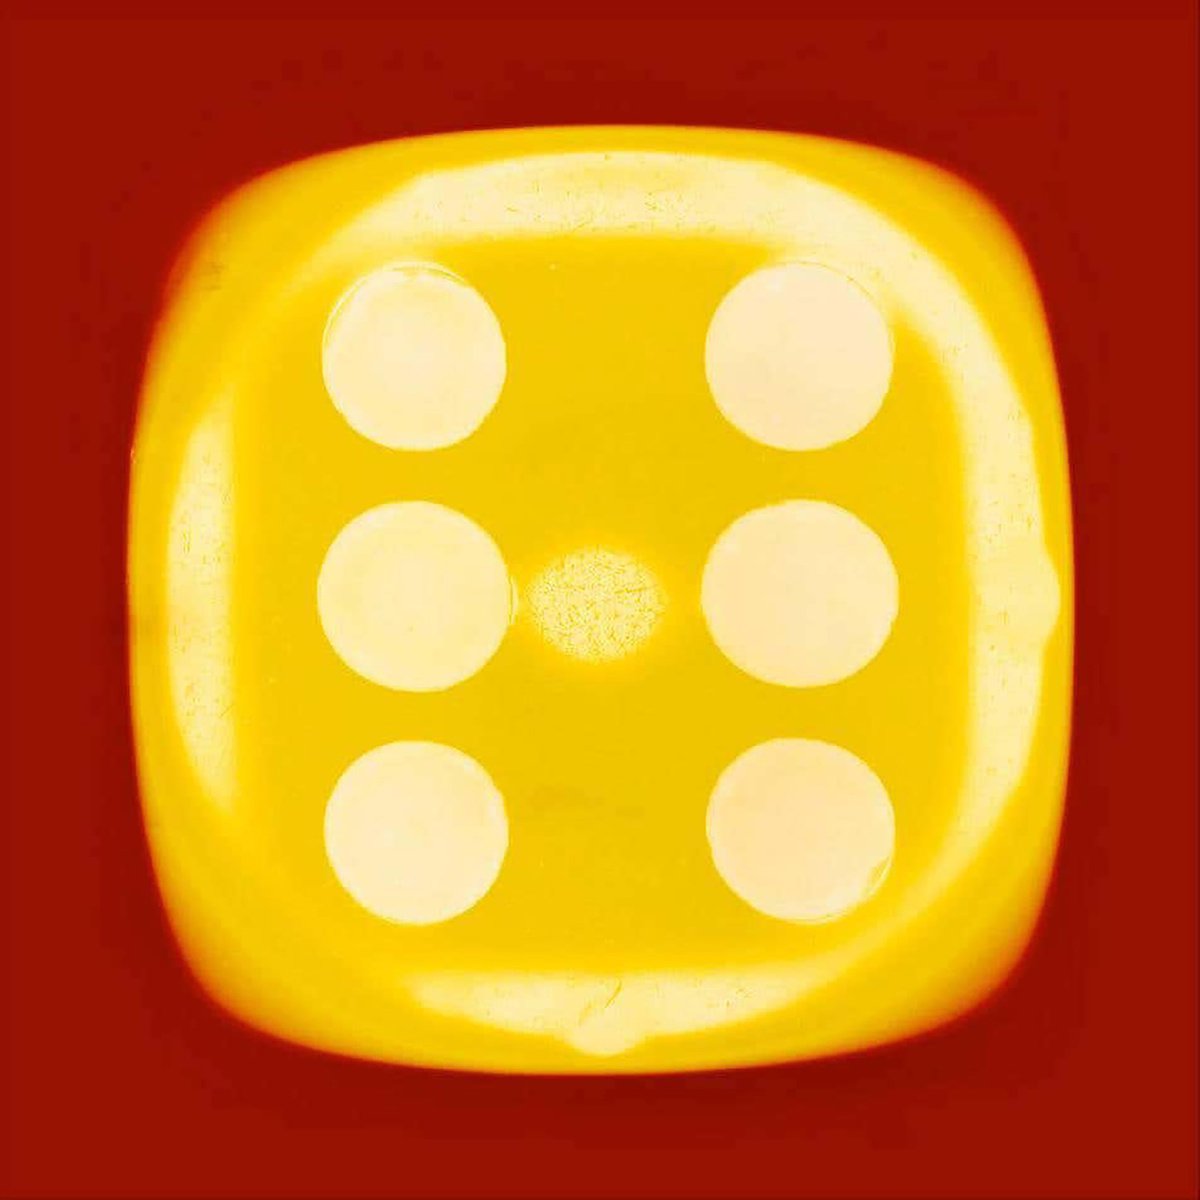 Heidler & Heeps Dice Series, Chartreuse Yellow Six (red) by Richard Heeps